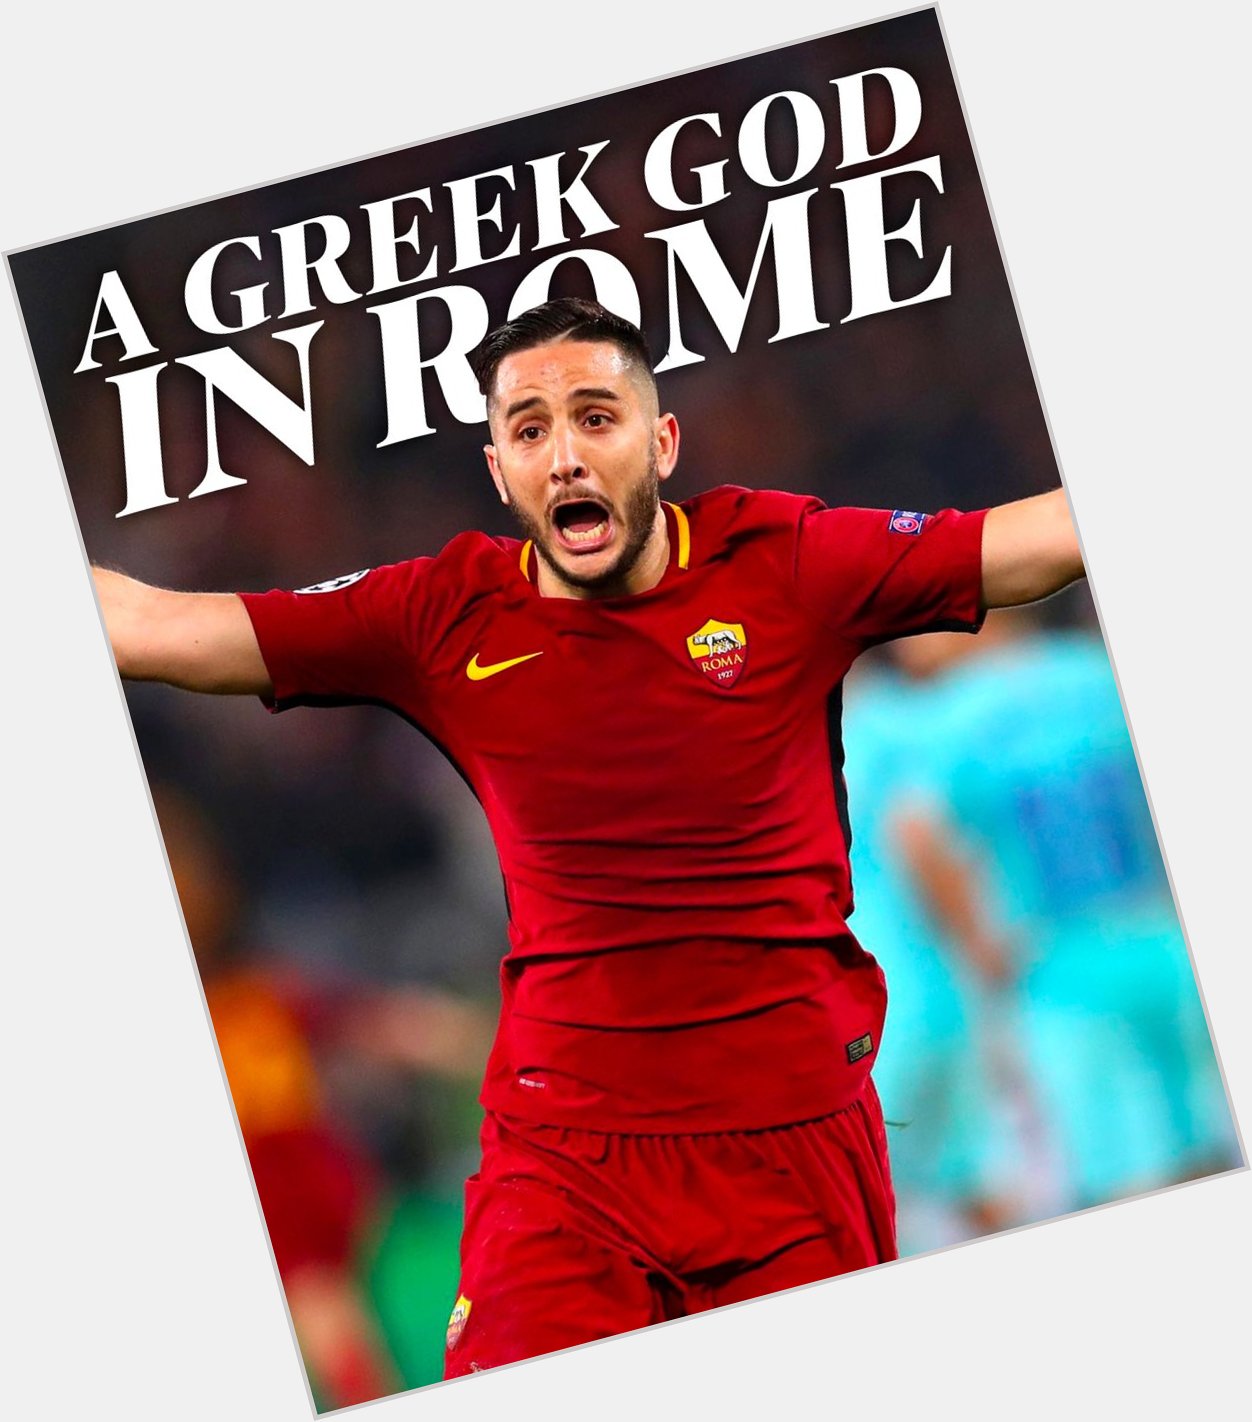 \"A Greek God in Rome!\" 

Happy Birthday to Kostas Manolas who have us this iconic moment!   